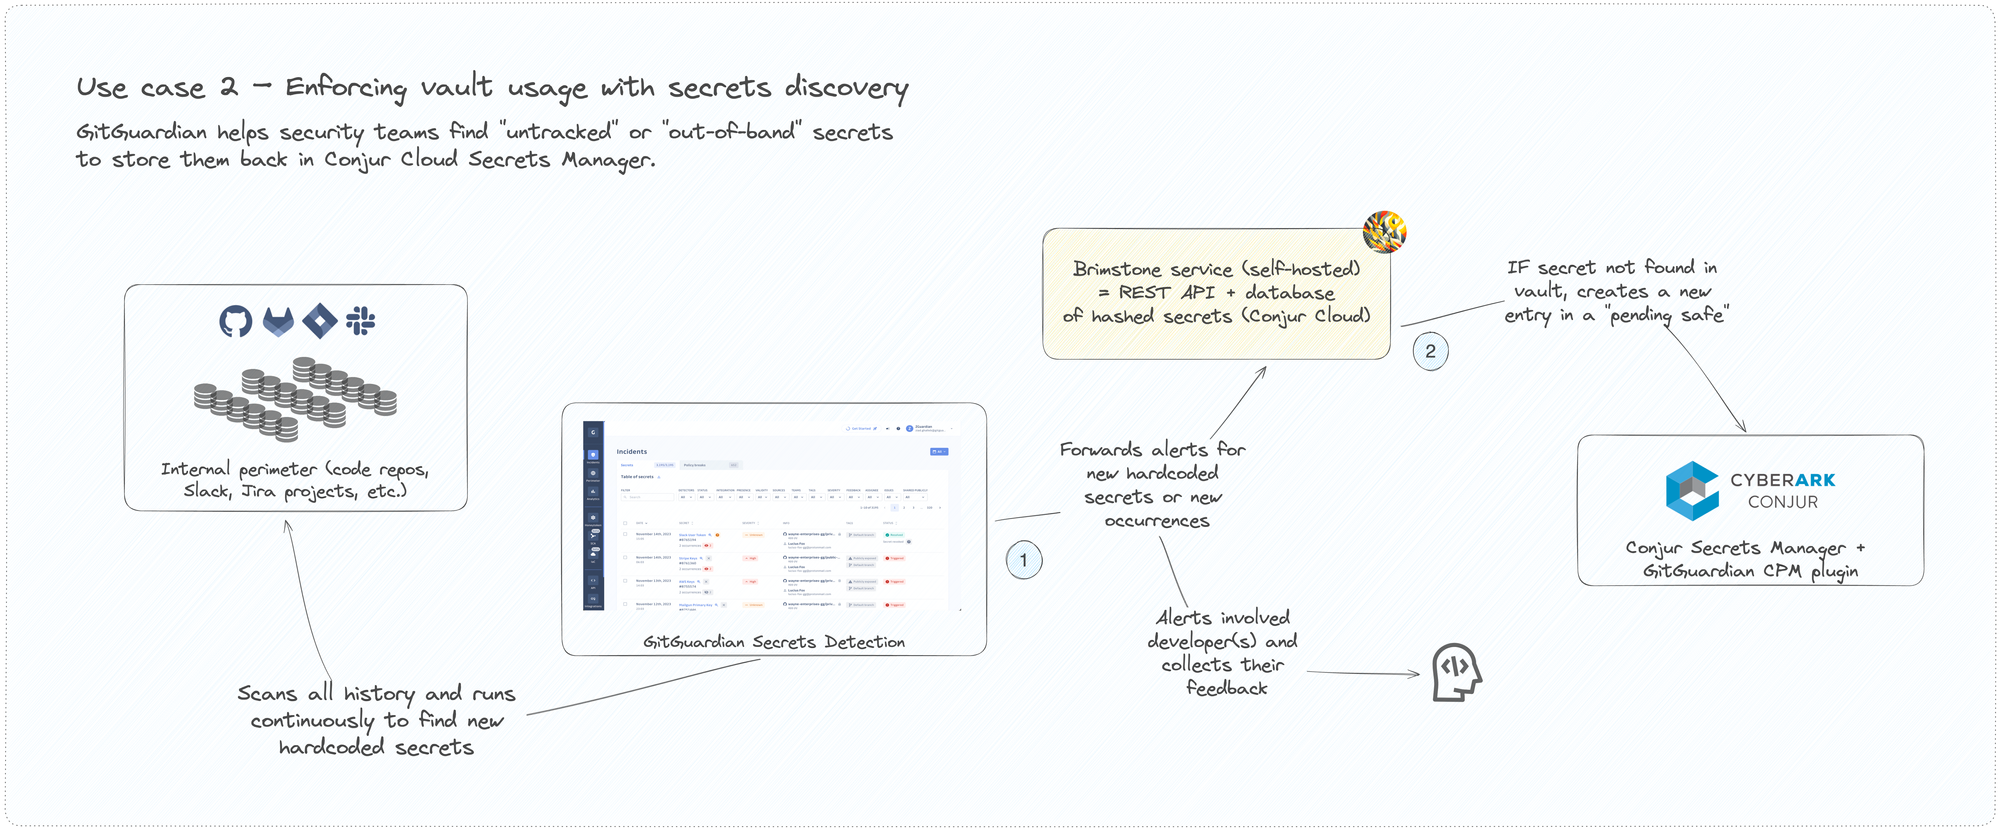 Use case 2. Enforcing vault usage with secrets discovery